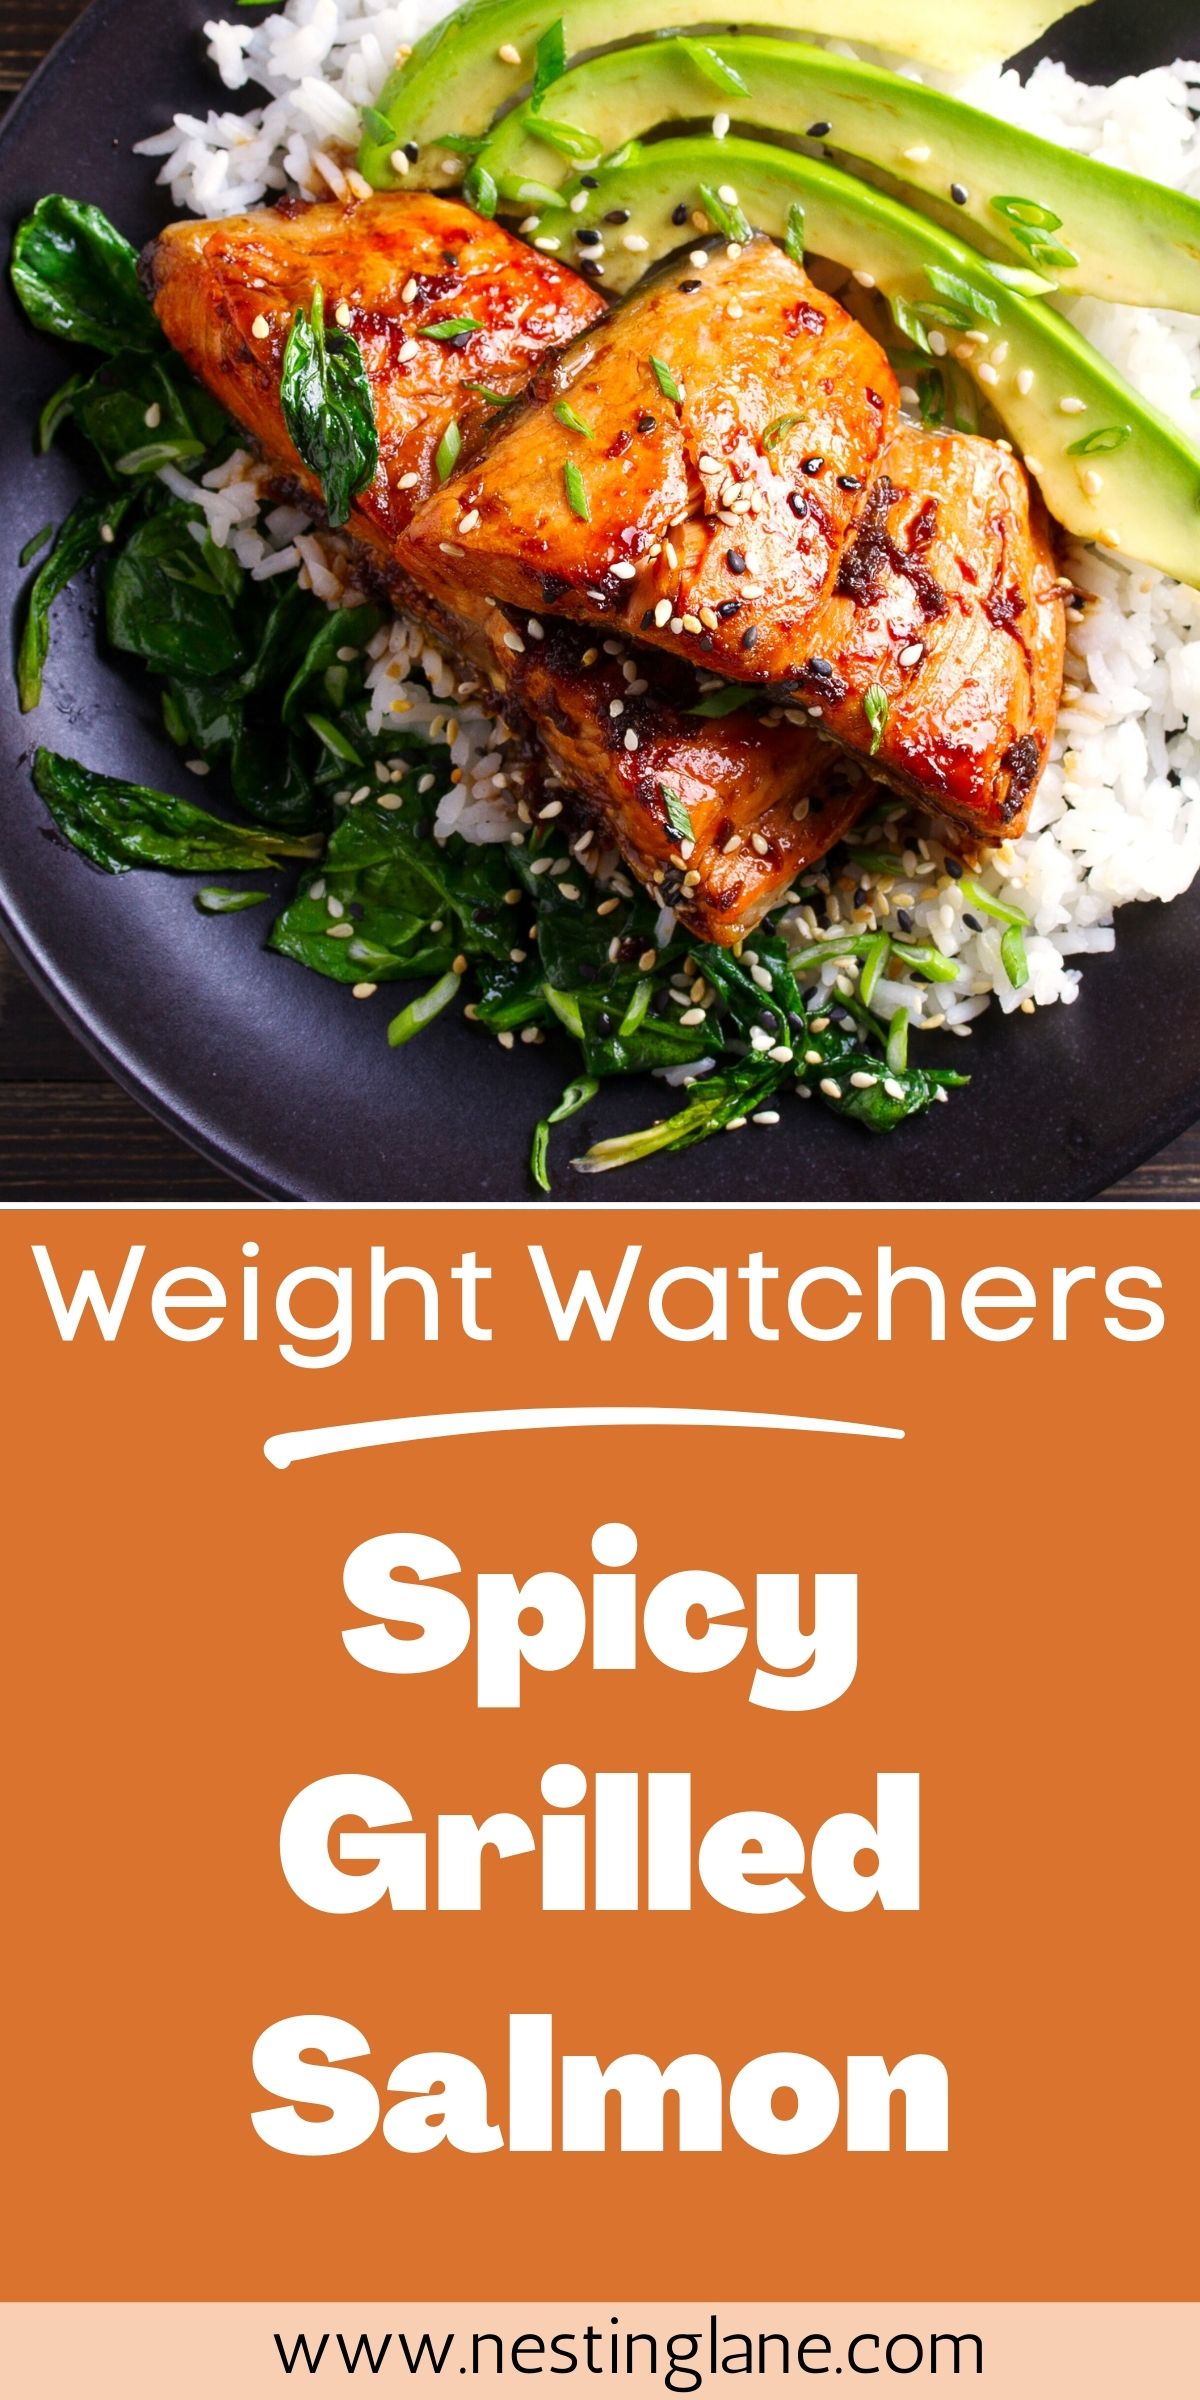 Graphic for Pinterest of Weight Watchers Spicy Grilled Salmon with Sesame Sauce Recipe.